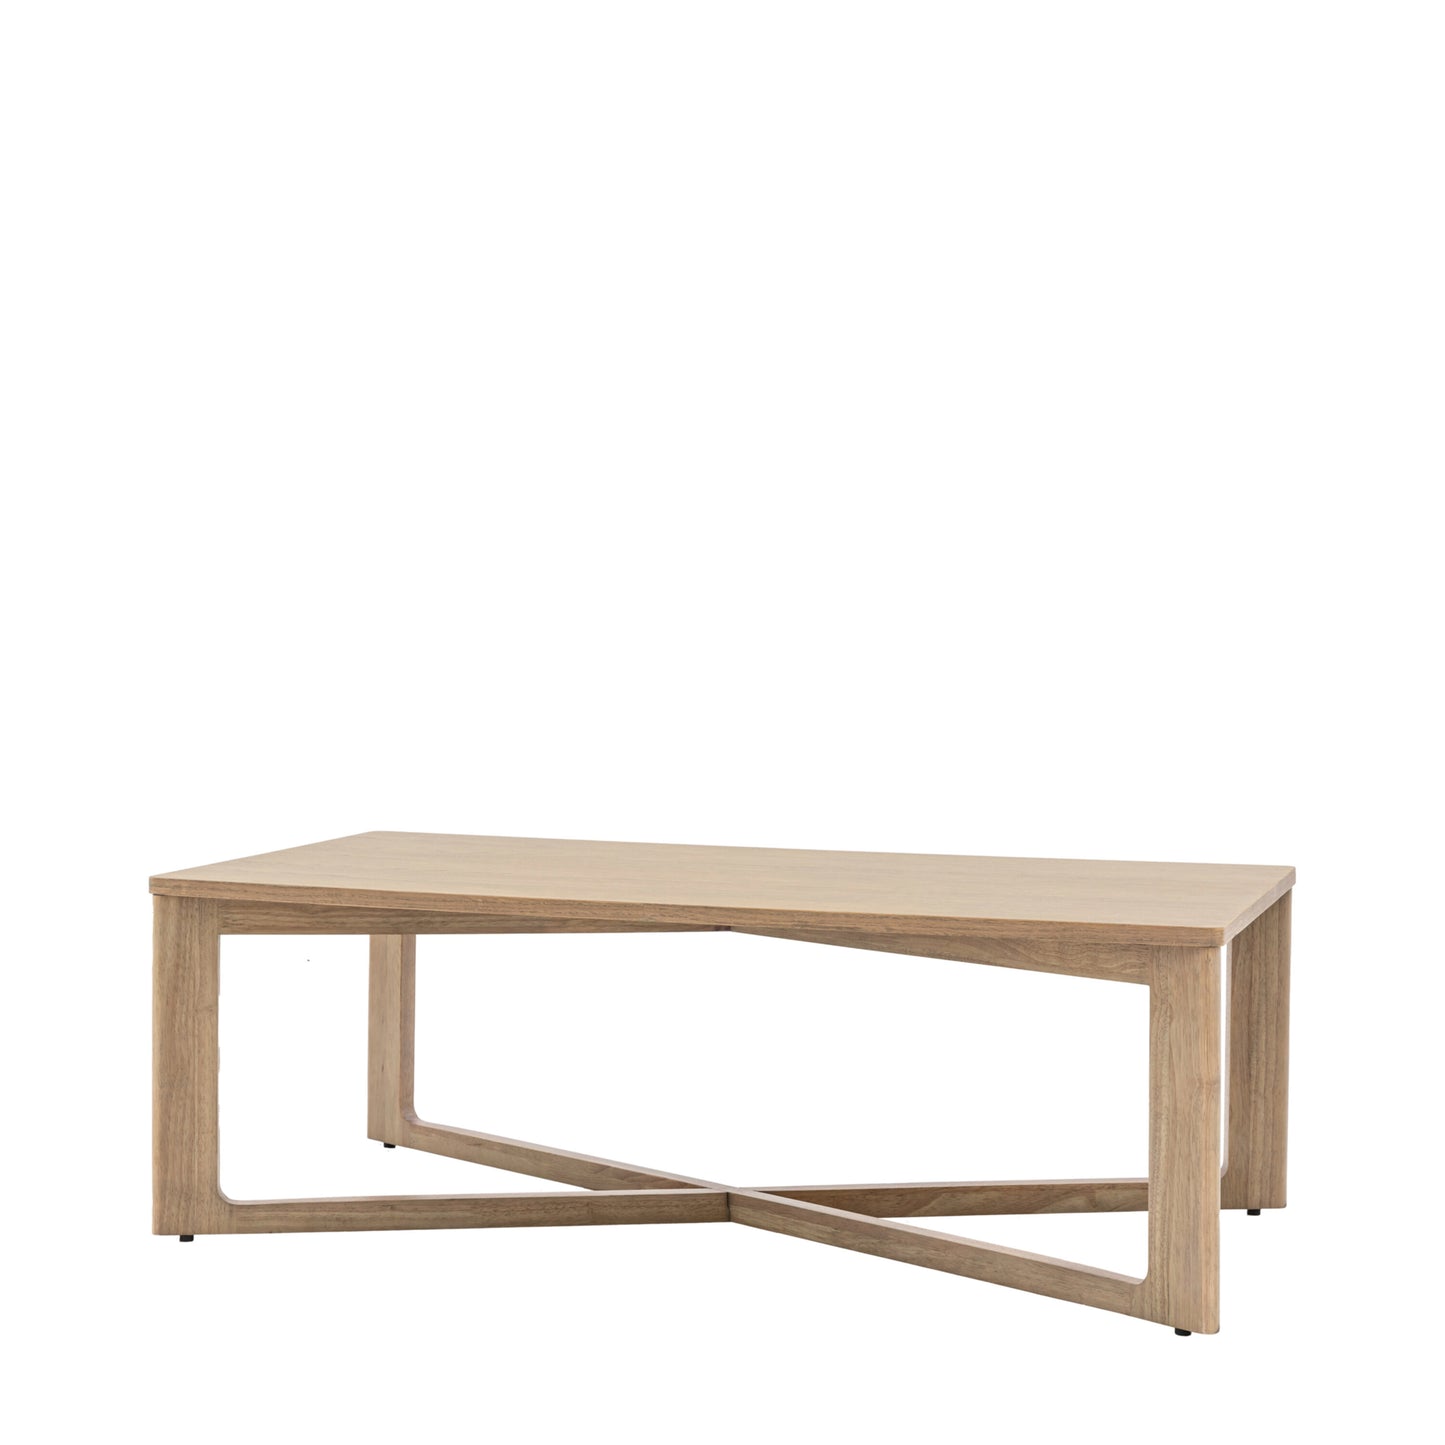 Retro Panelled Style Coffee Table 